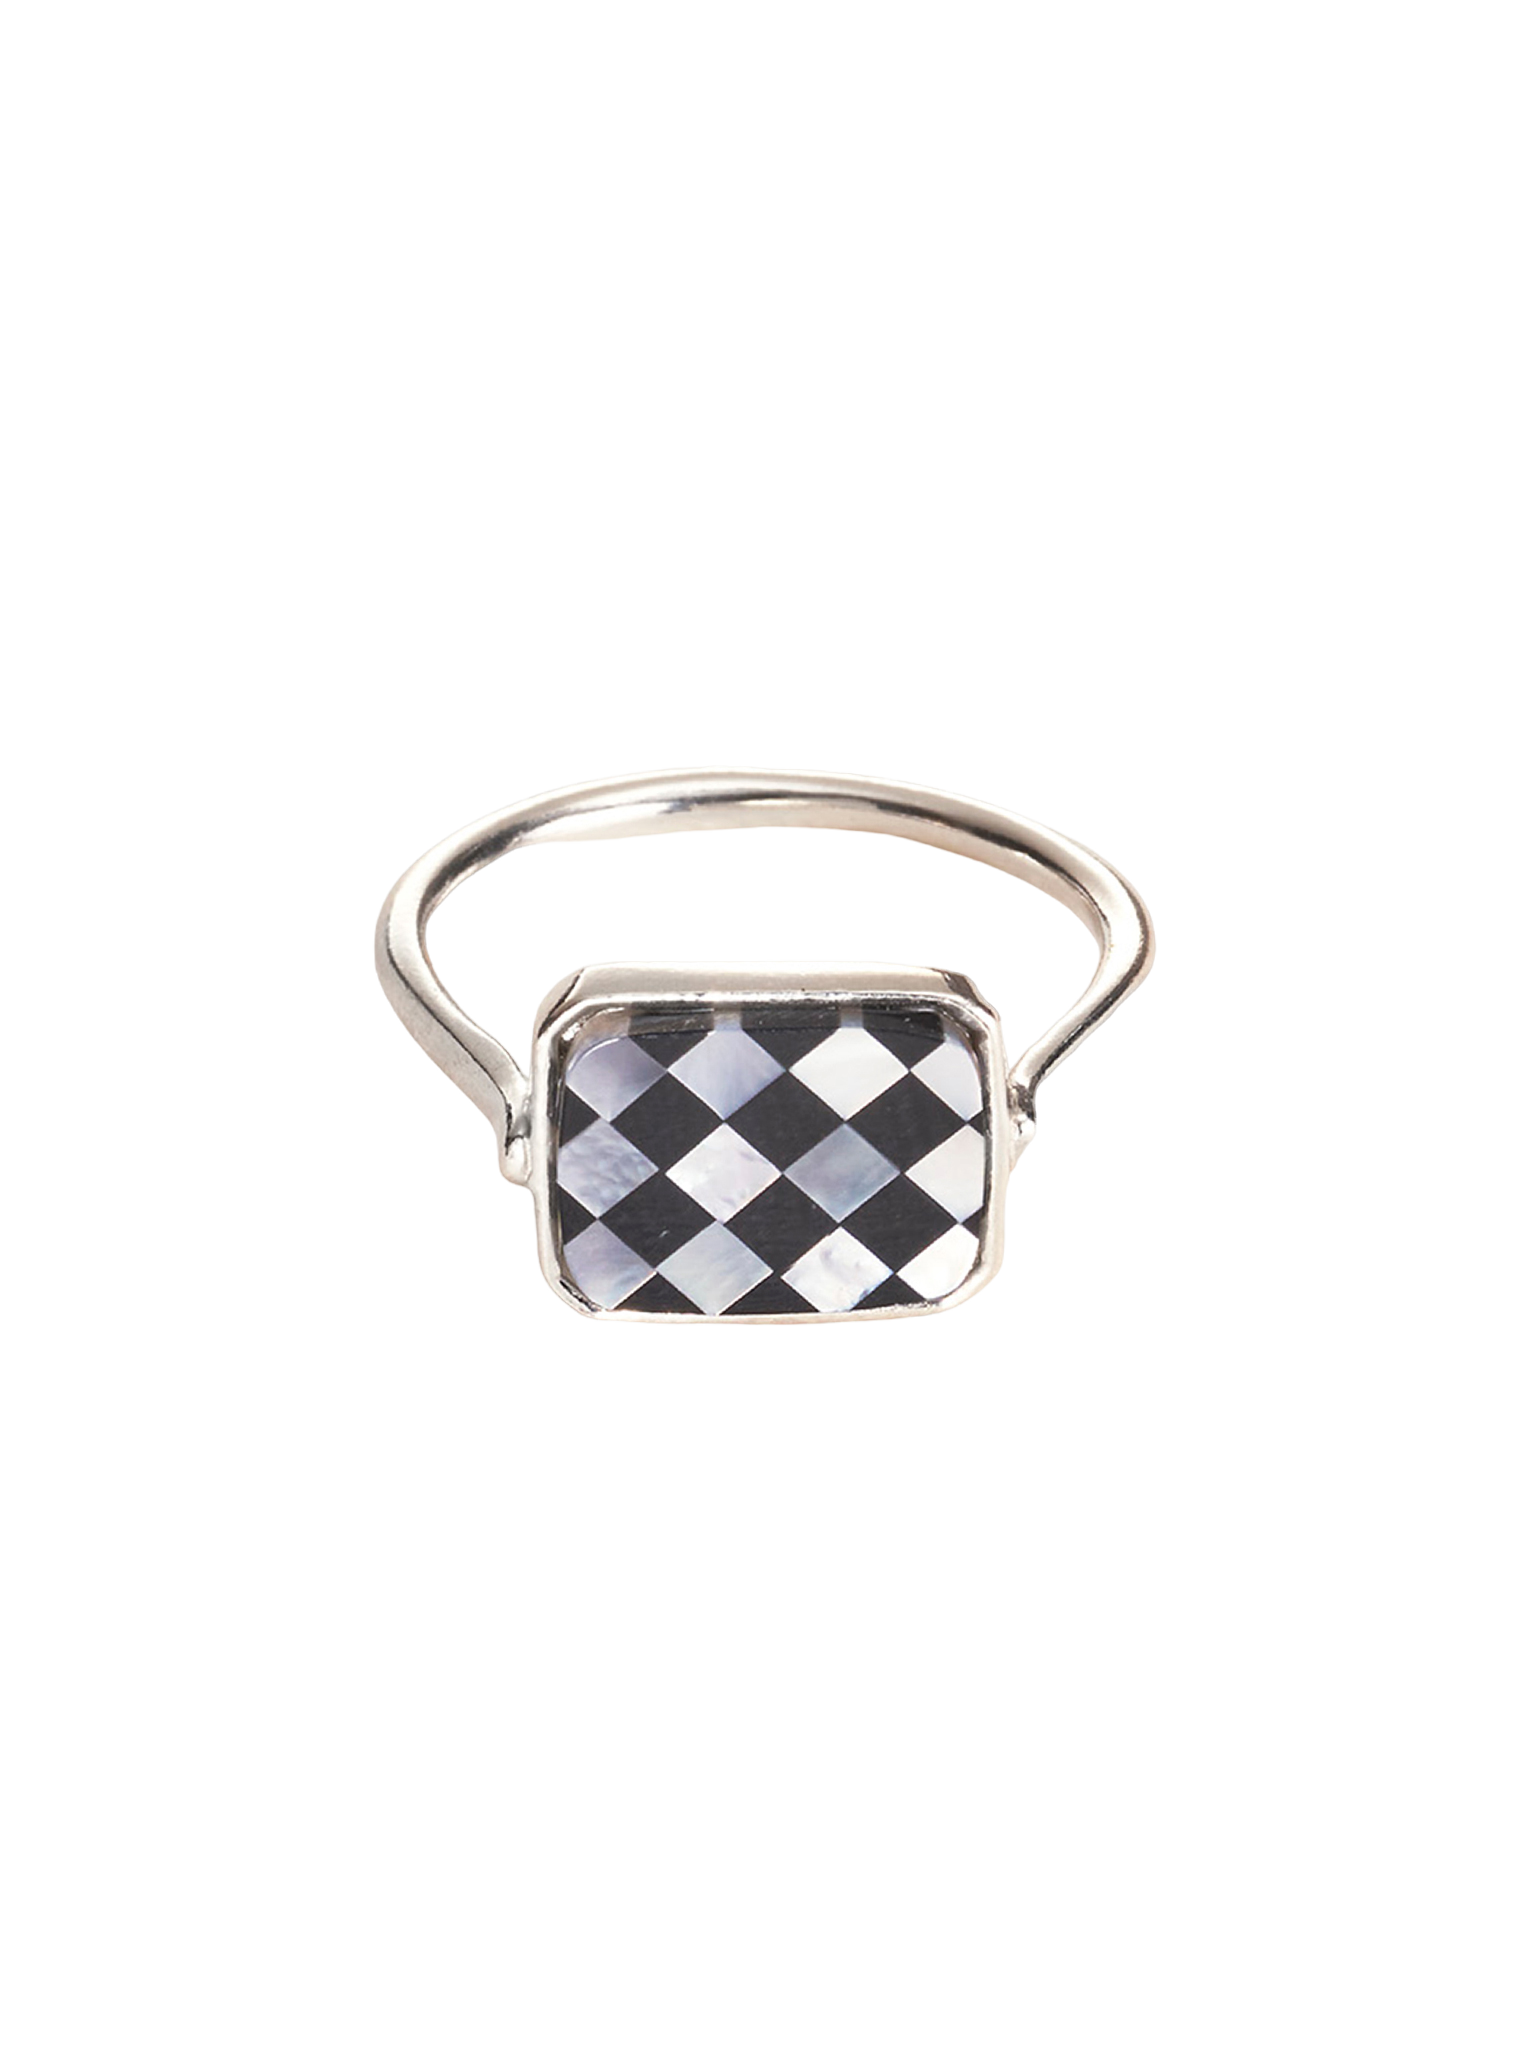 Mosaic ring in silver